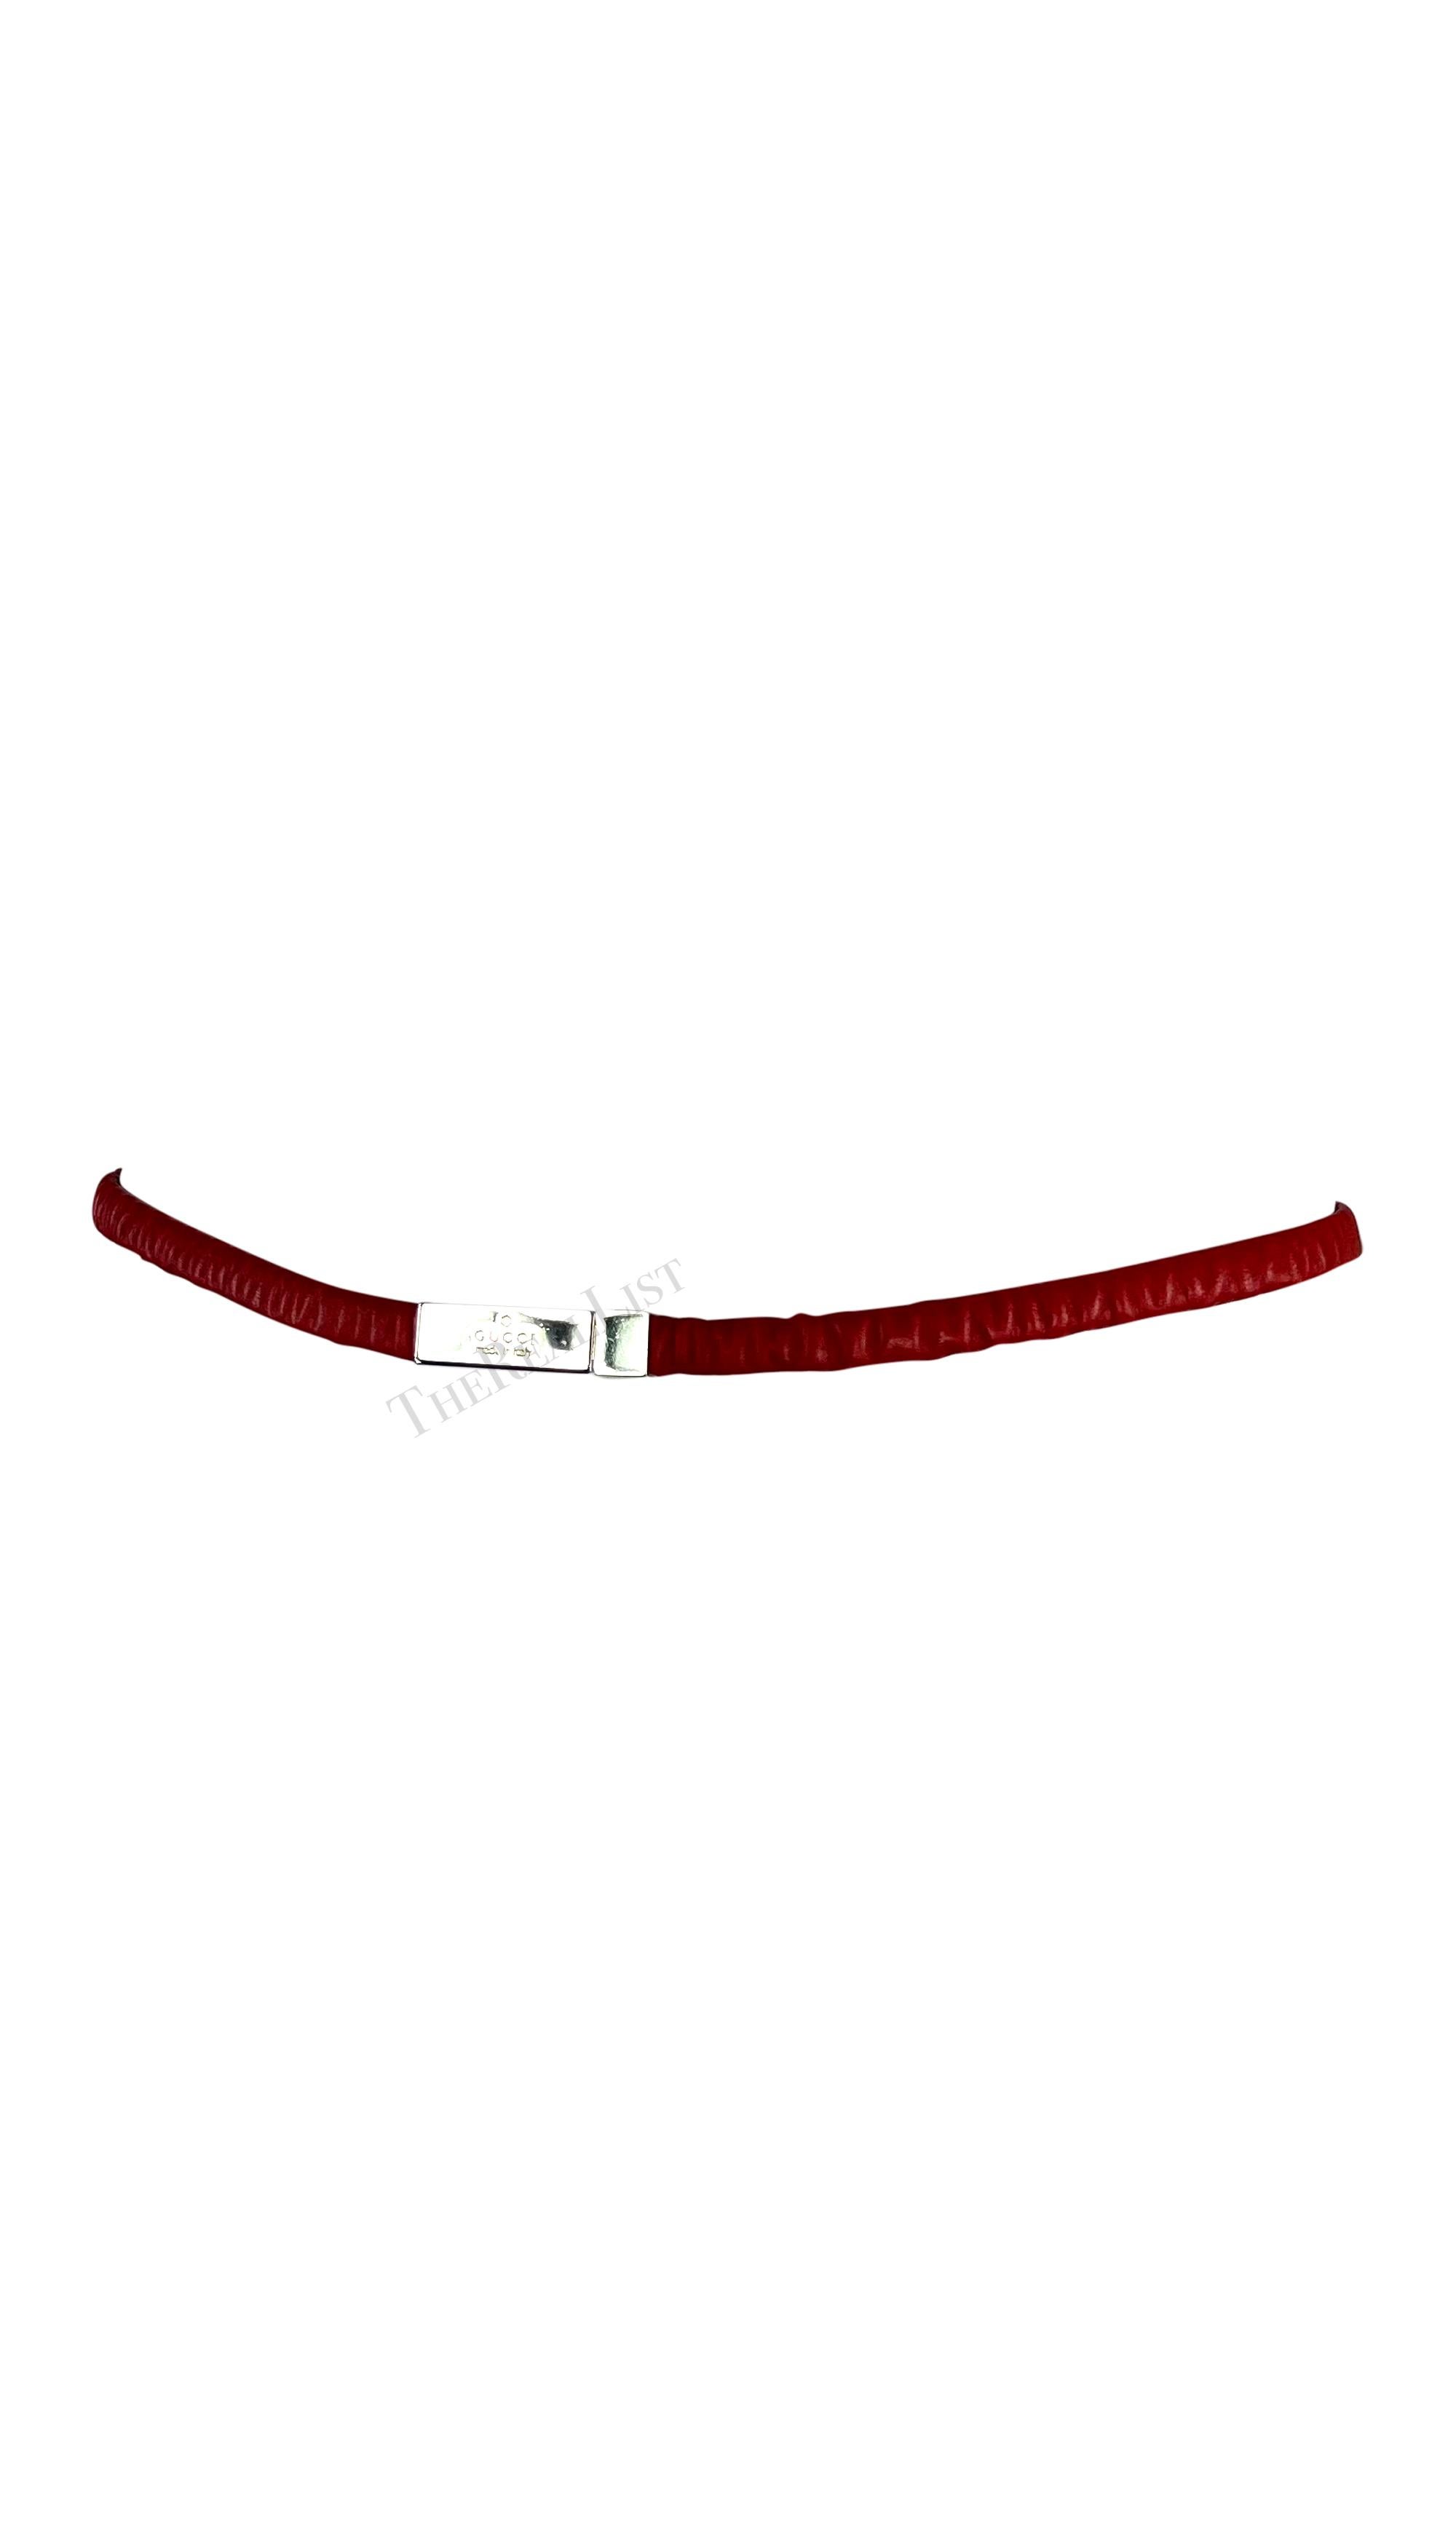 S/S 1999 Gucci by Tom Ford Runway Elasticized Red Leather Logo Thin Belt In Excellent Condition For Sale In West Hollywood, CA